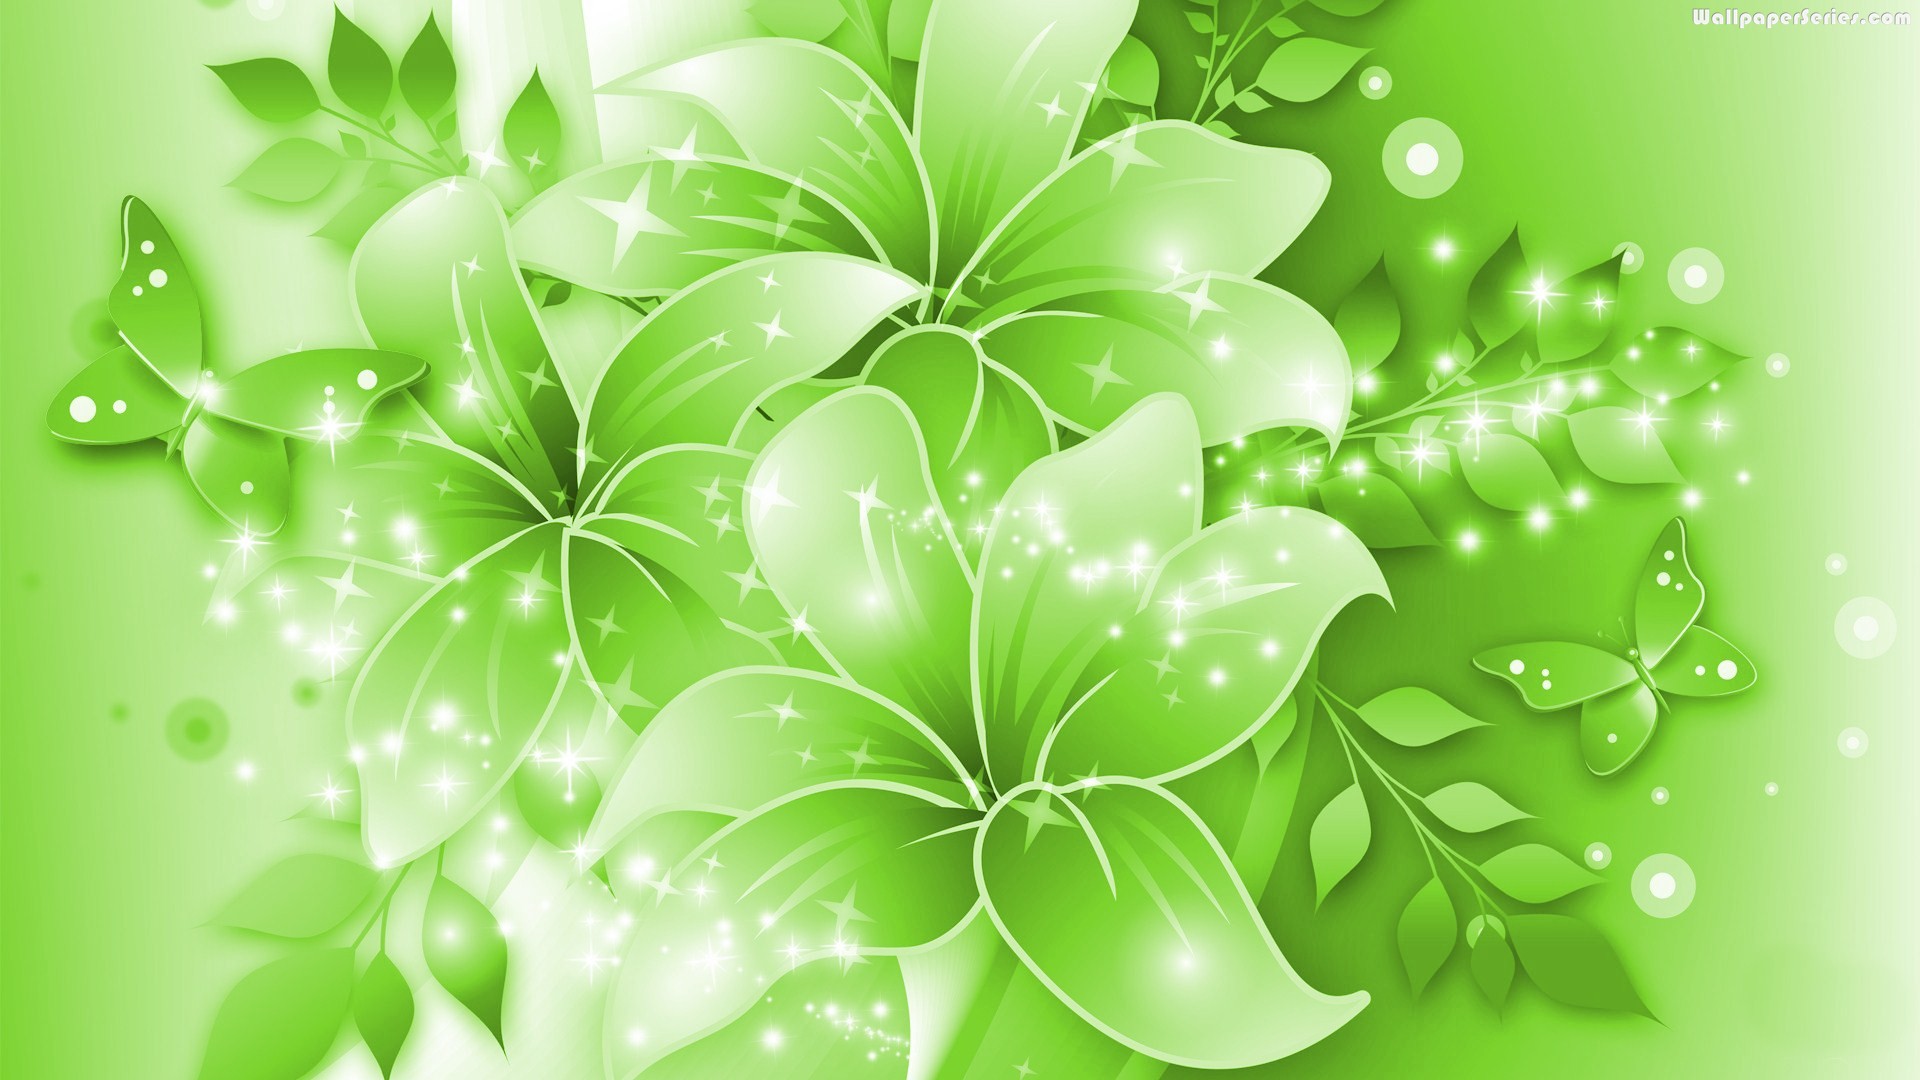 animated green flower image